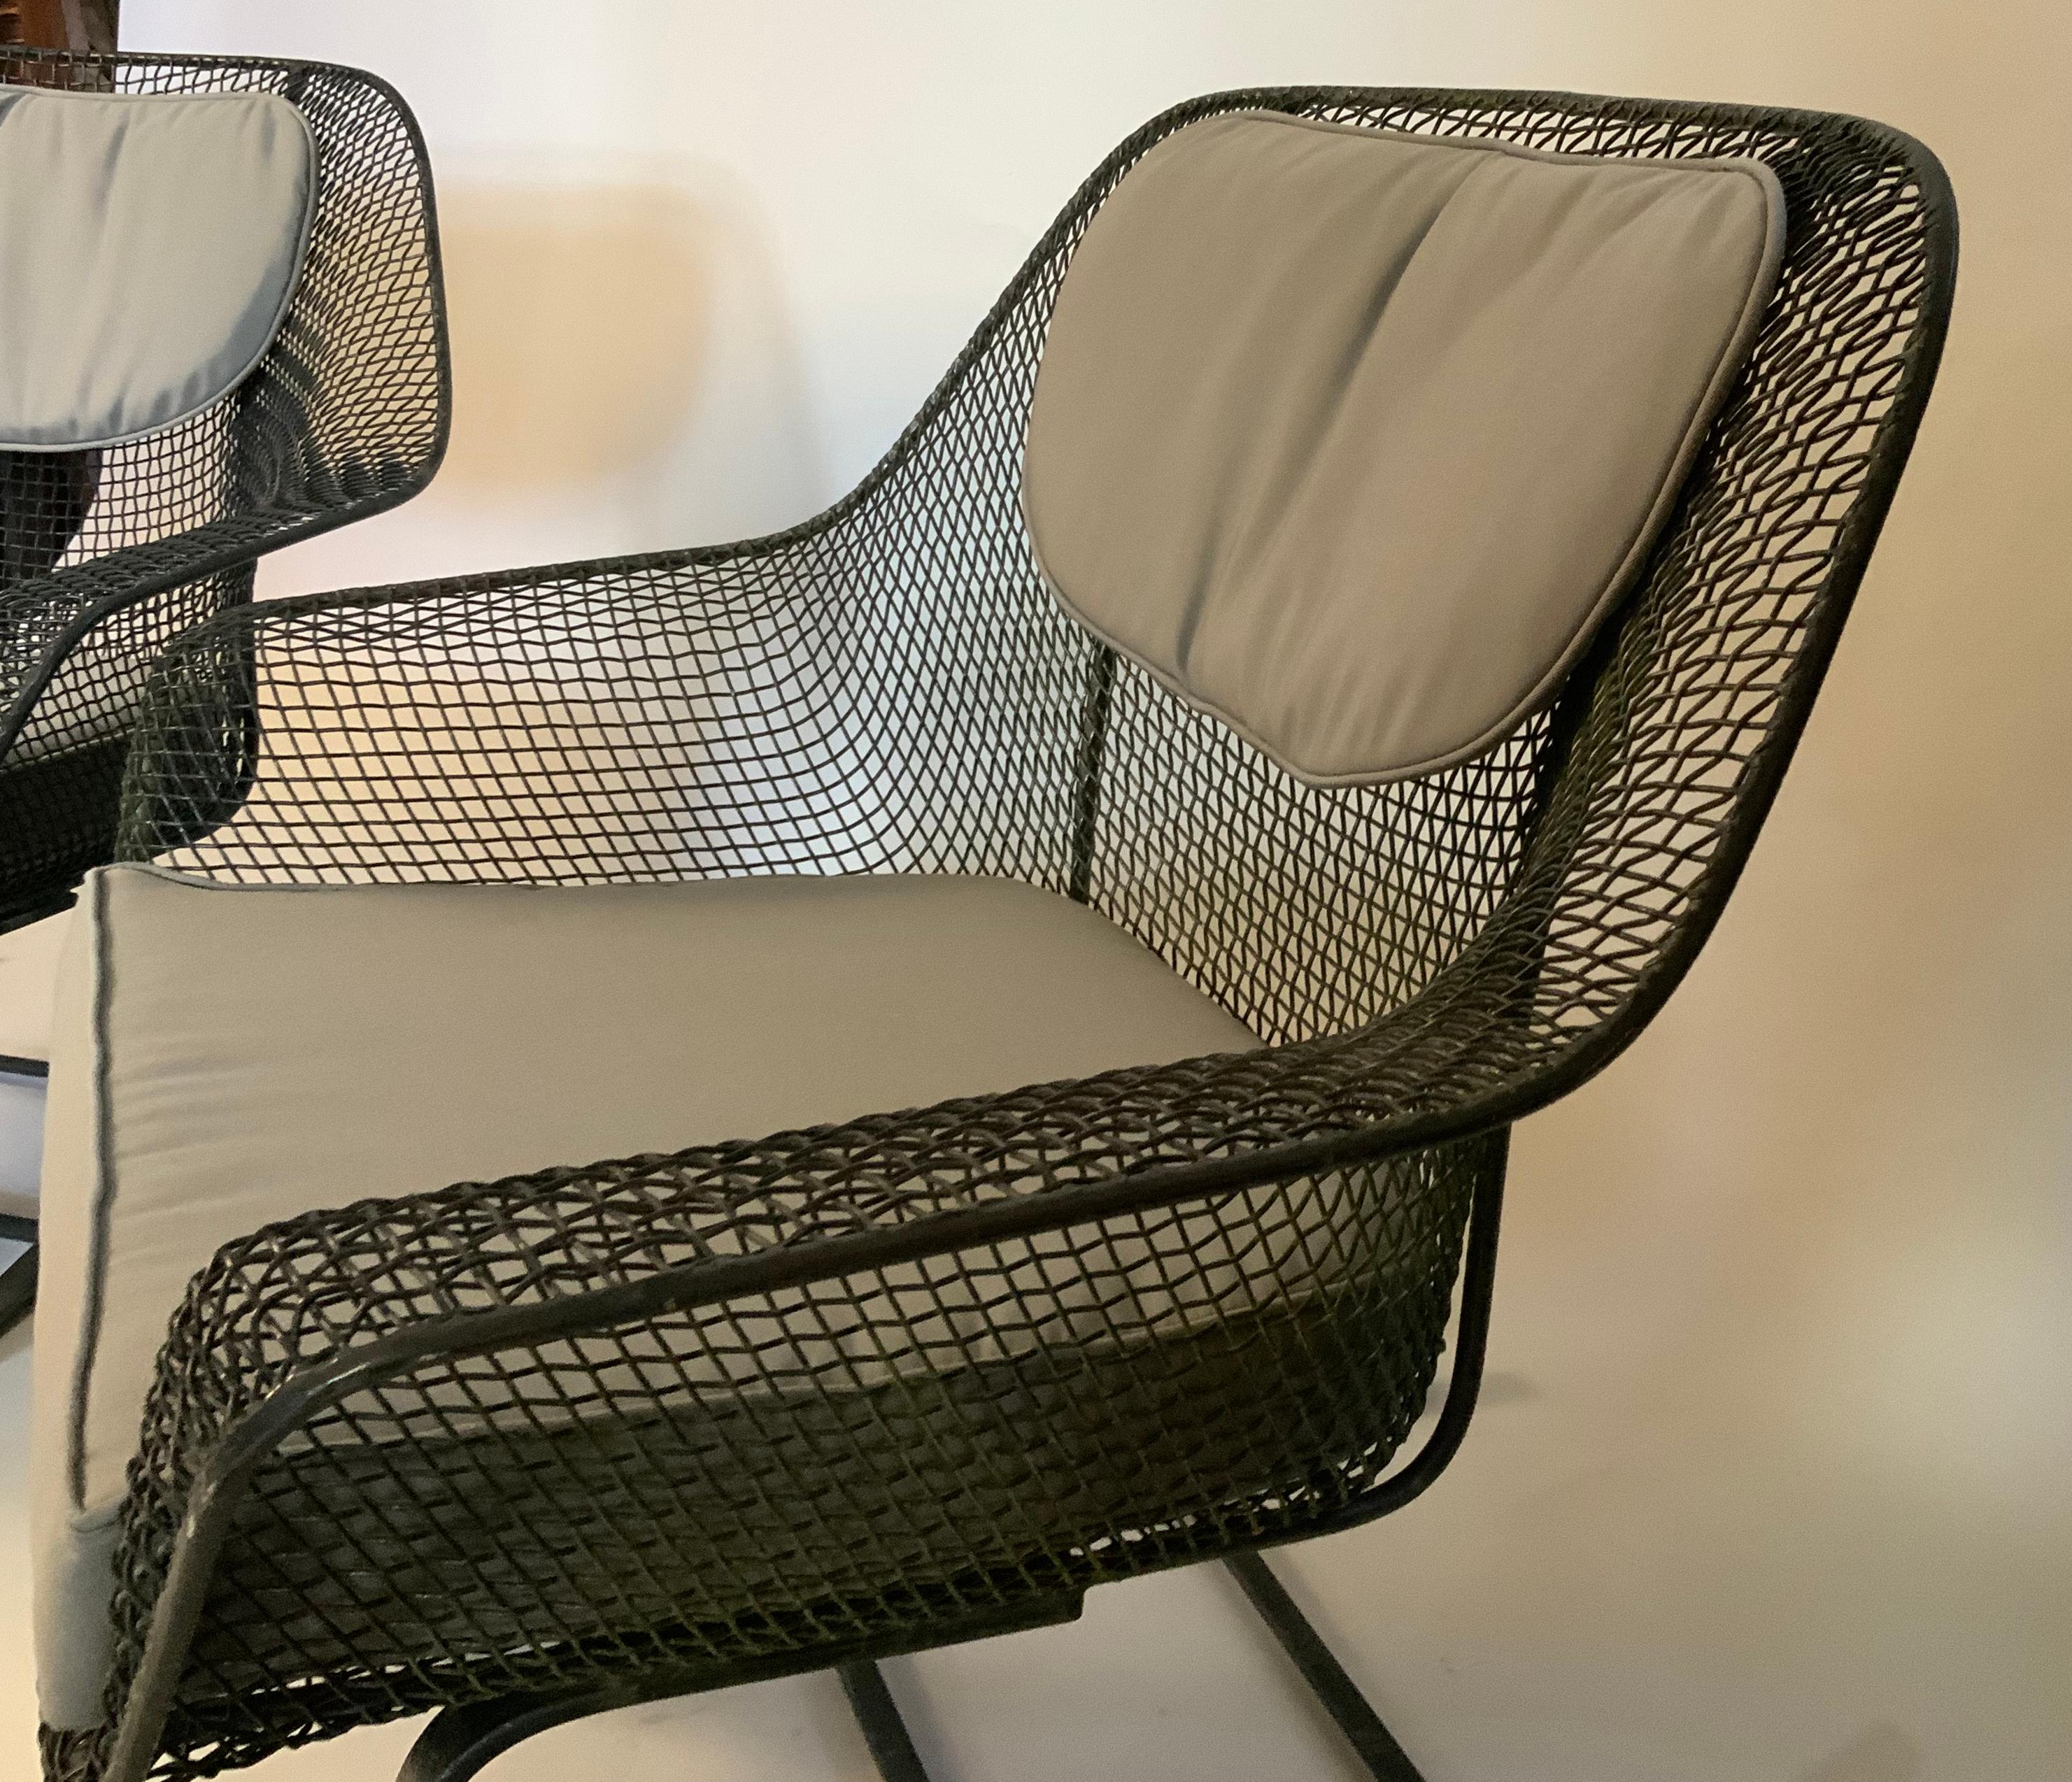 A 1950s wrought iron and steel mesh settee and large lounge chair from Russell Woodard's iconic Sculptura series. Beautiful and Classic sculptural design, finished in black, but can be finished in any color you choose. Cushions not included but can